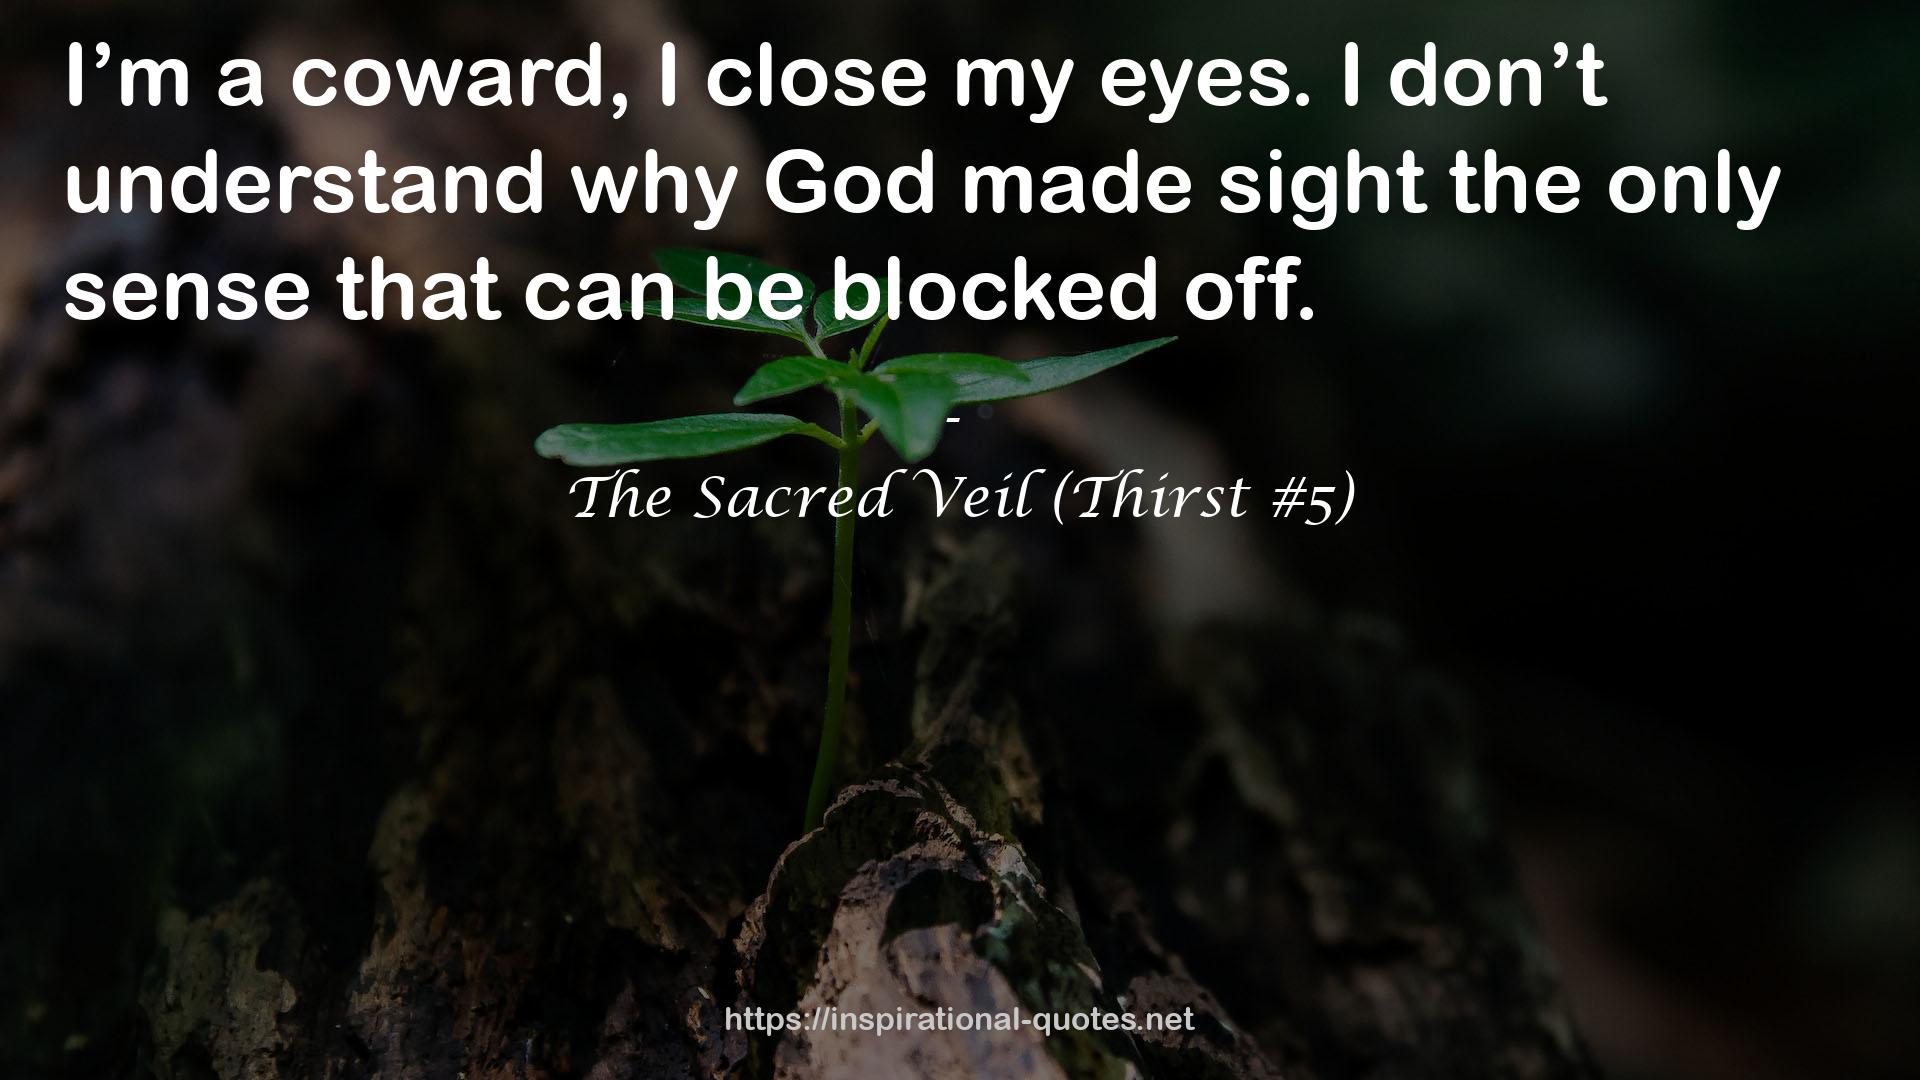 The Sacred Veil (Thirst #5) QUOTES